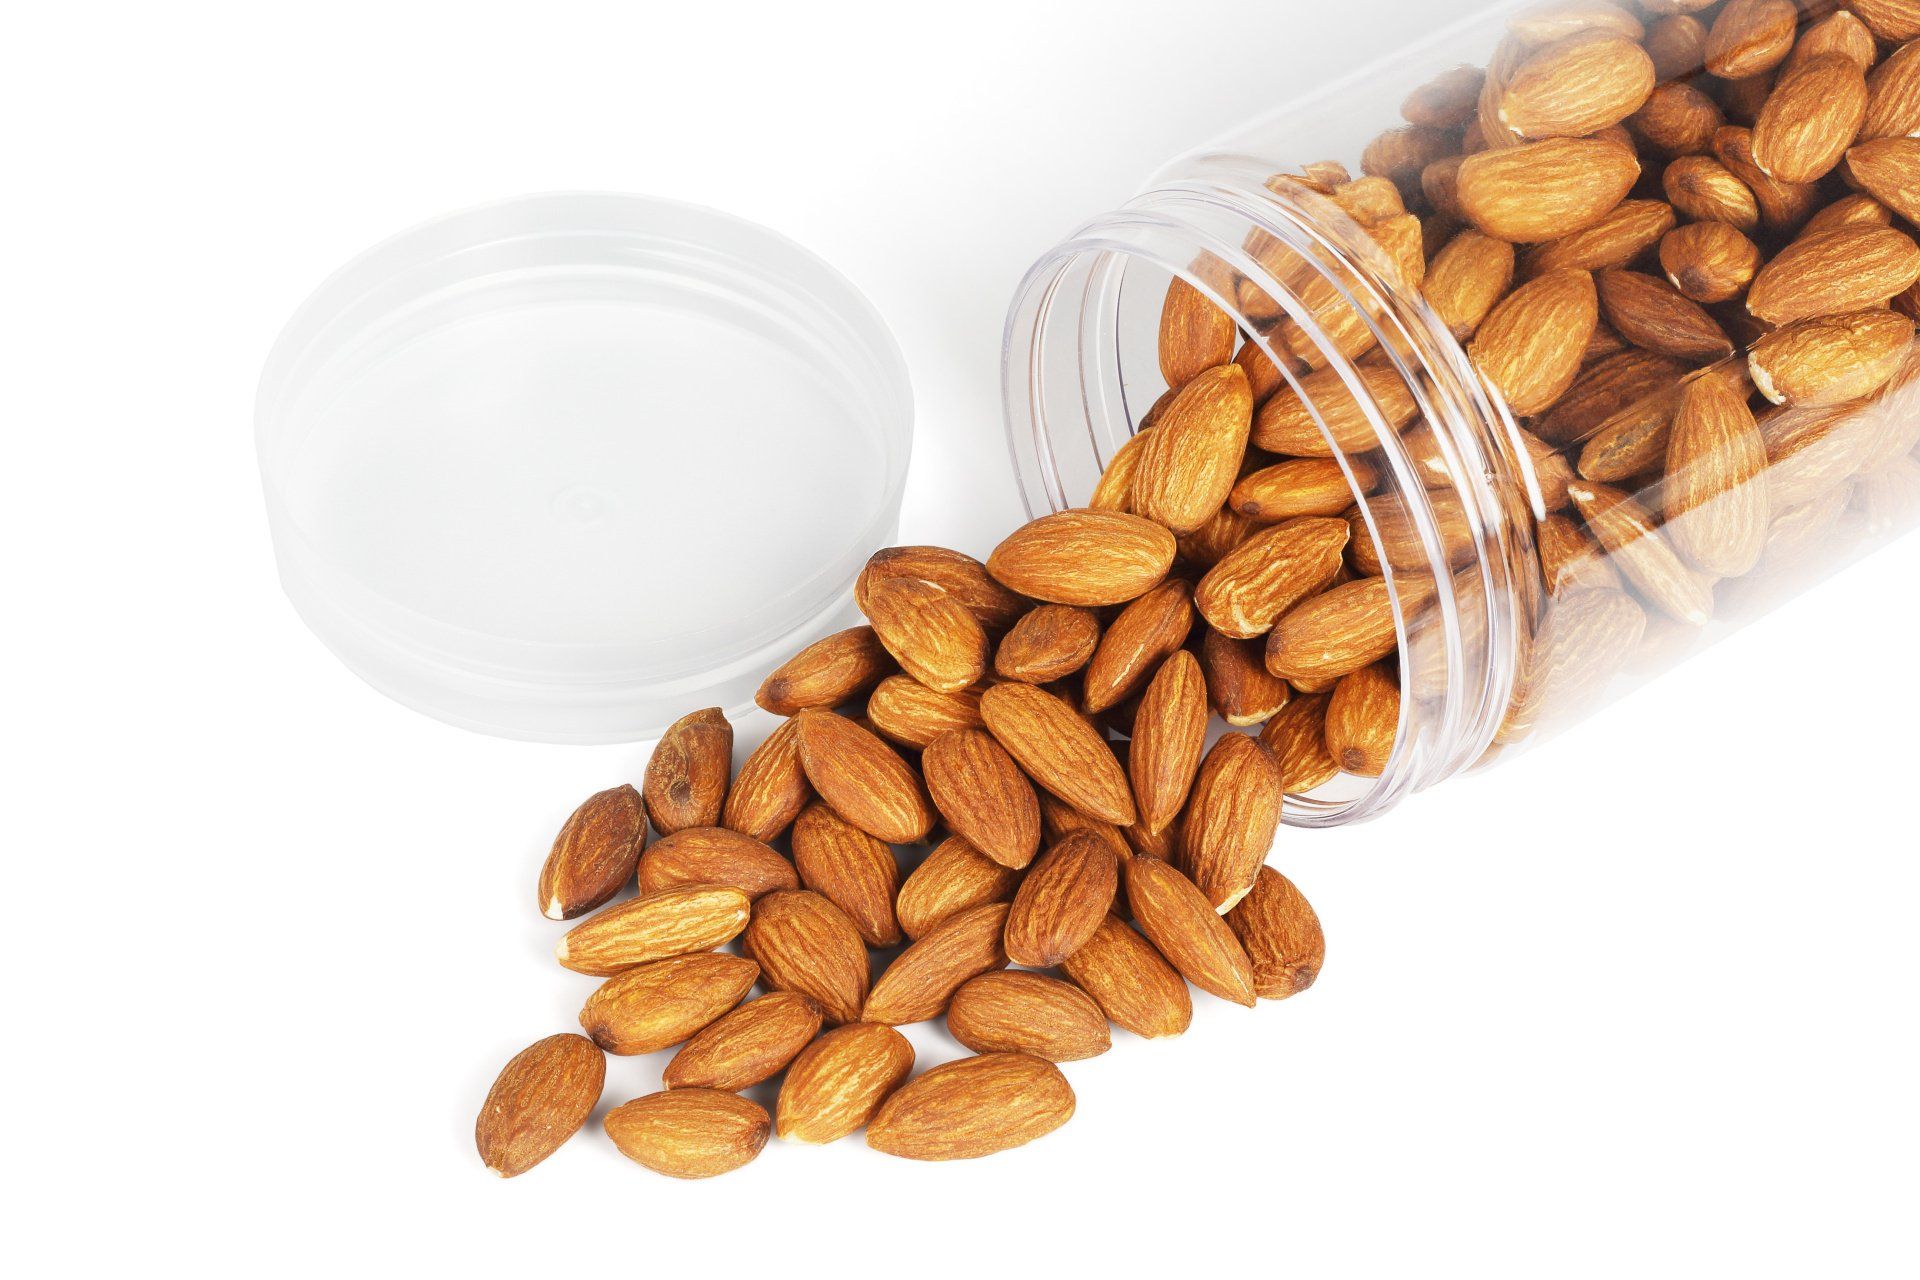 Almonds spilling out of a clear plastic jar.